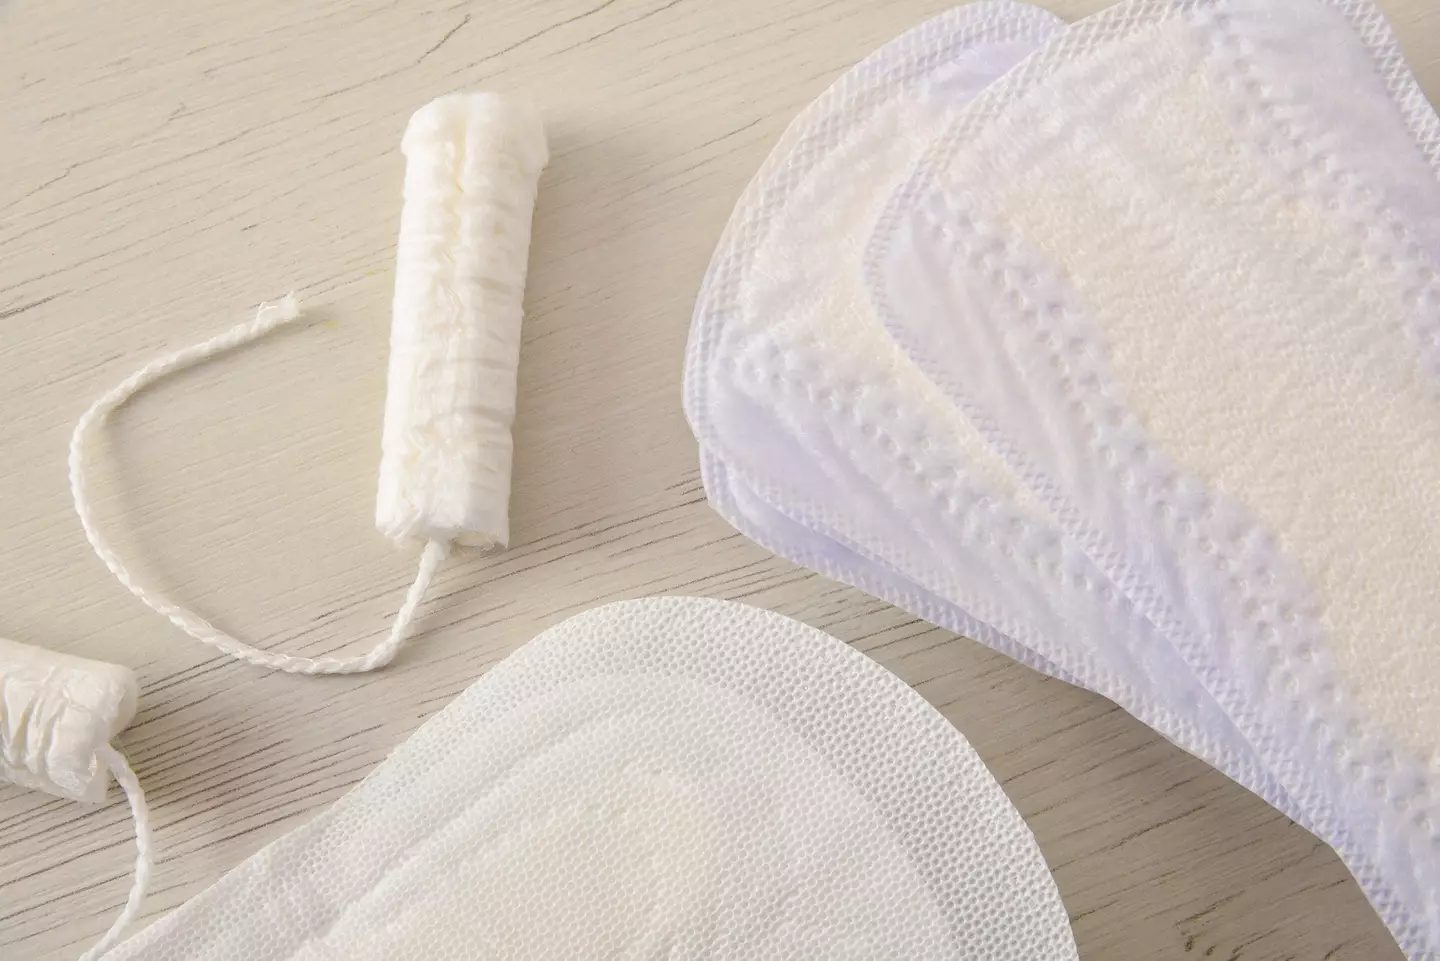 The 15-year-old girl was worried she needed to change her sanitary pad during the lesson.